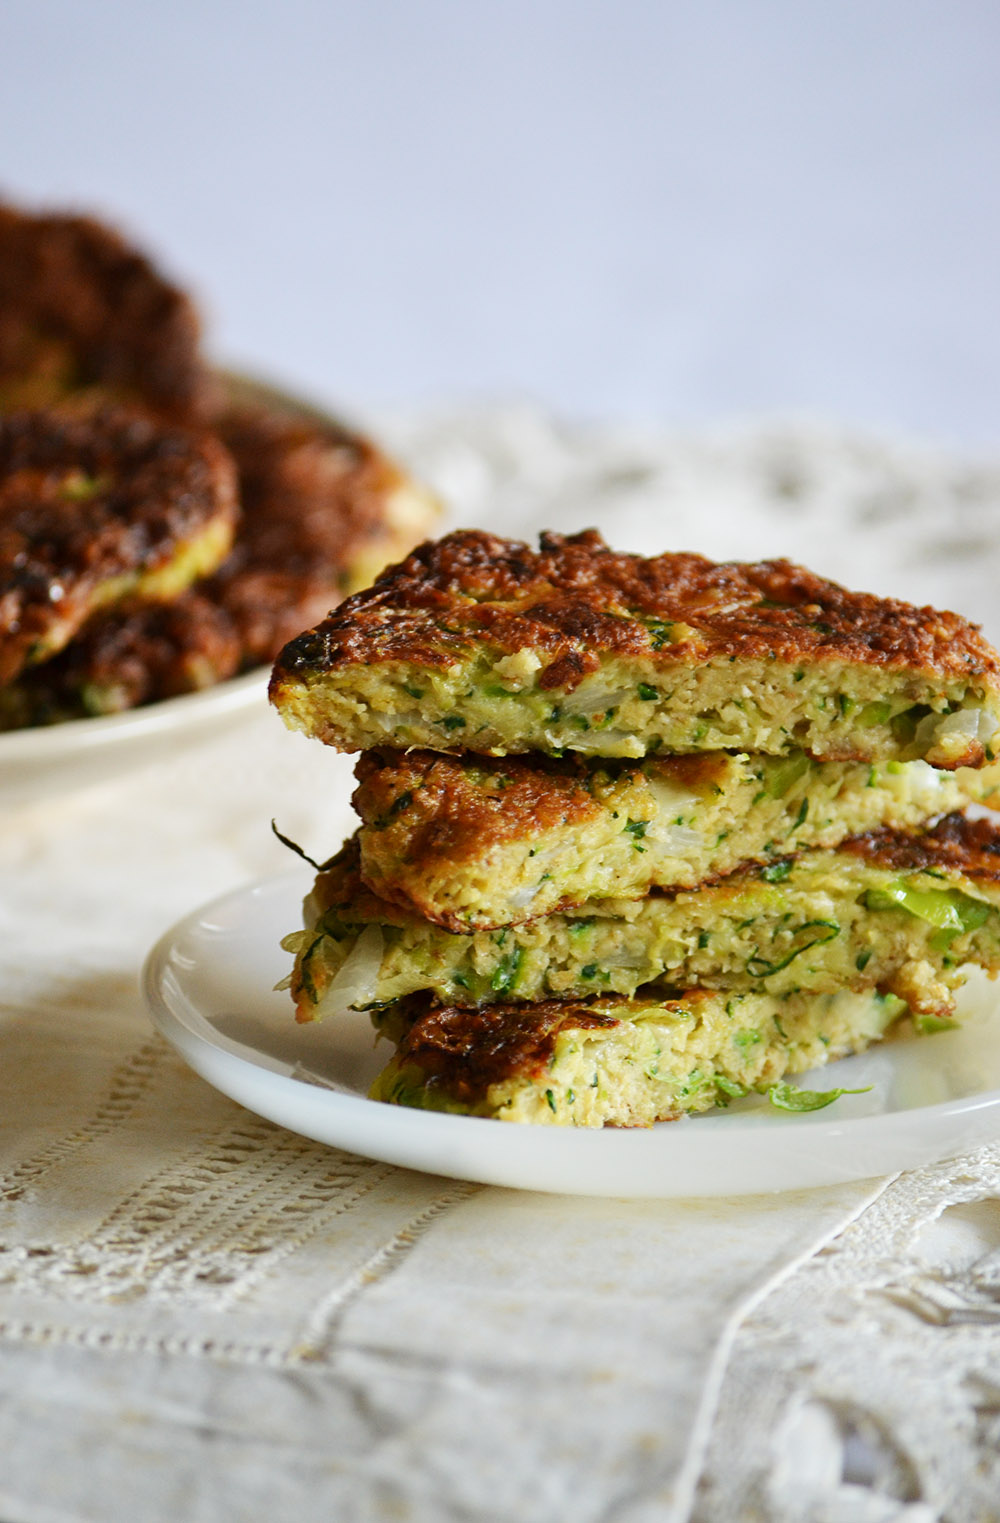 Courgette fritters – The Easiest Zucchini Recipe